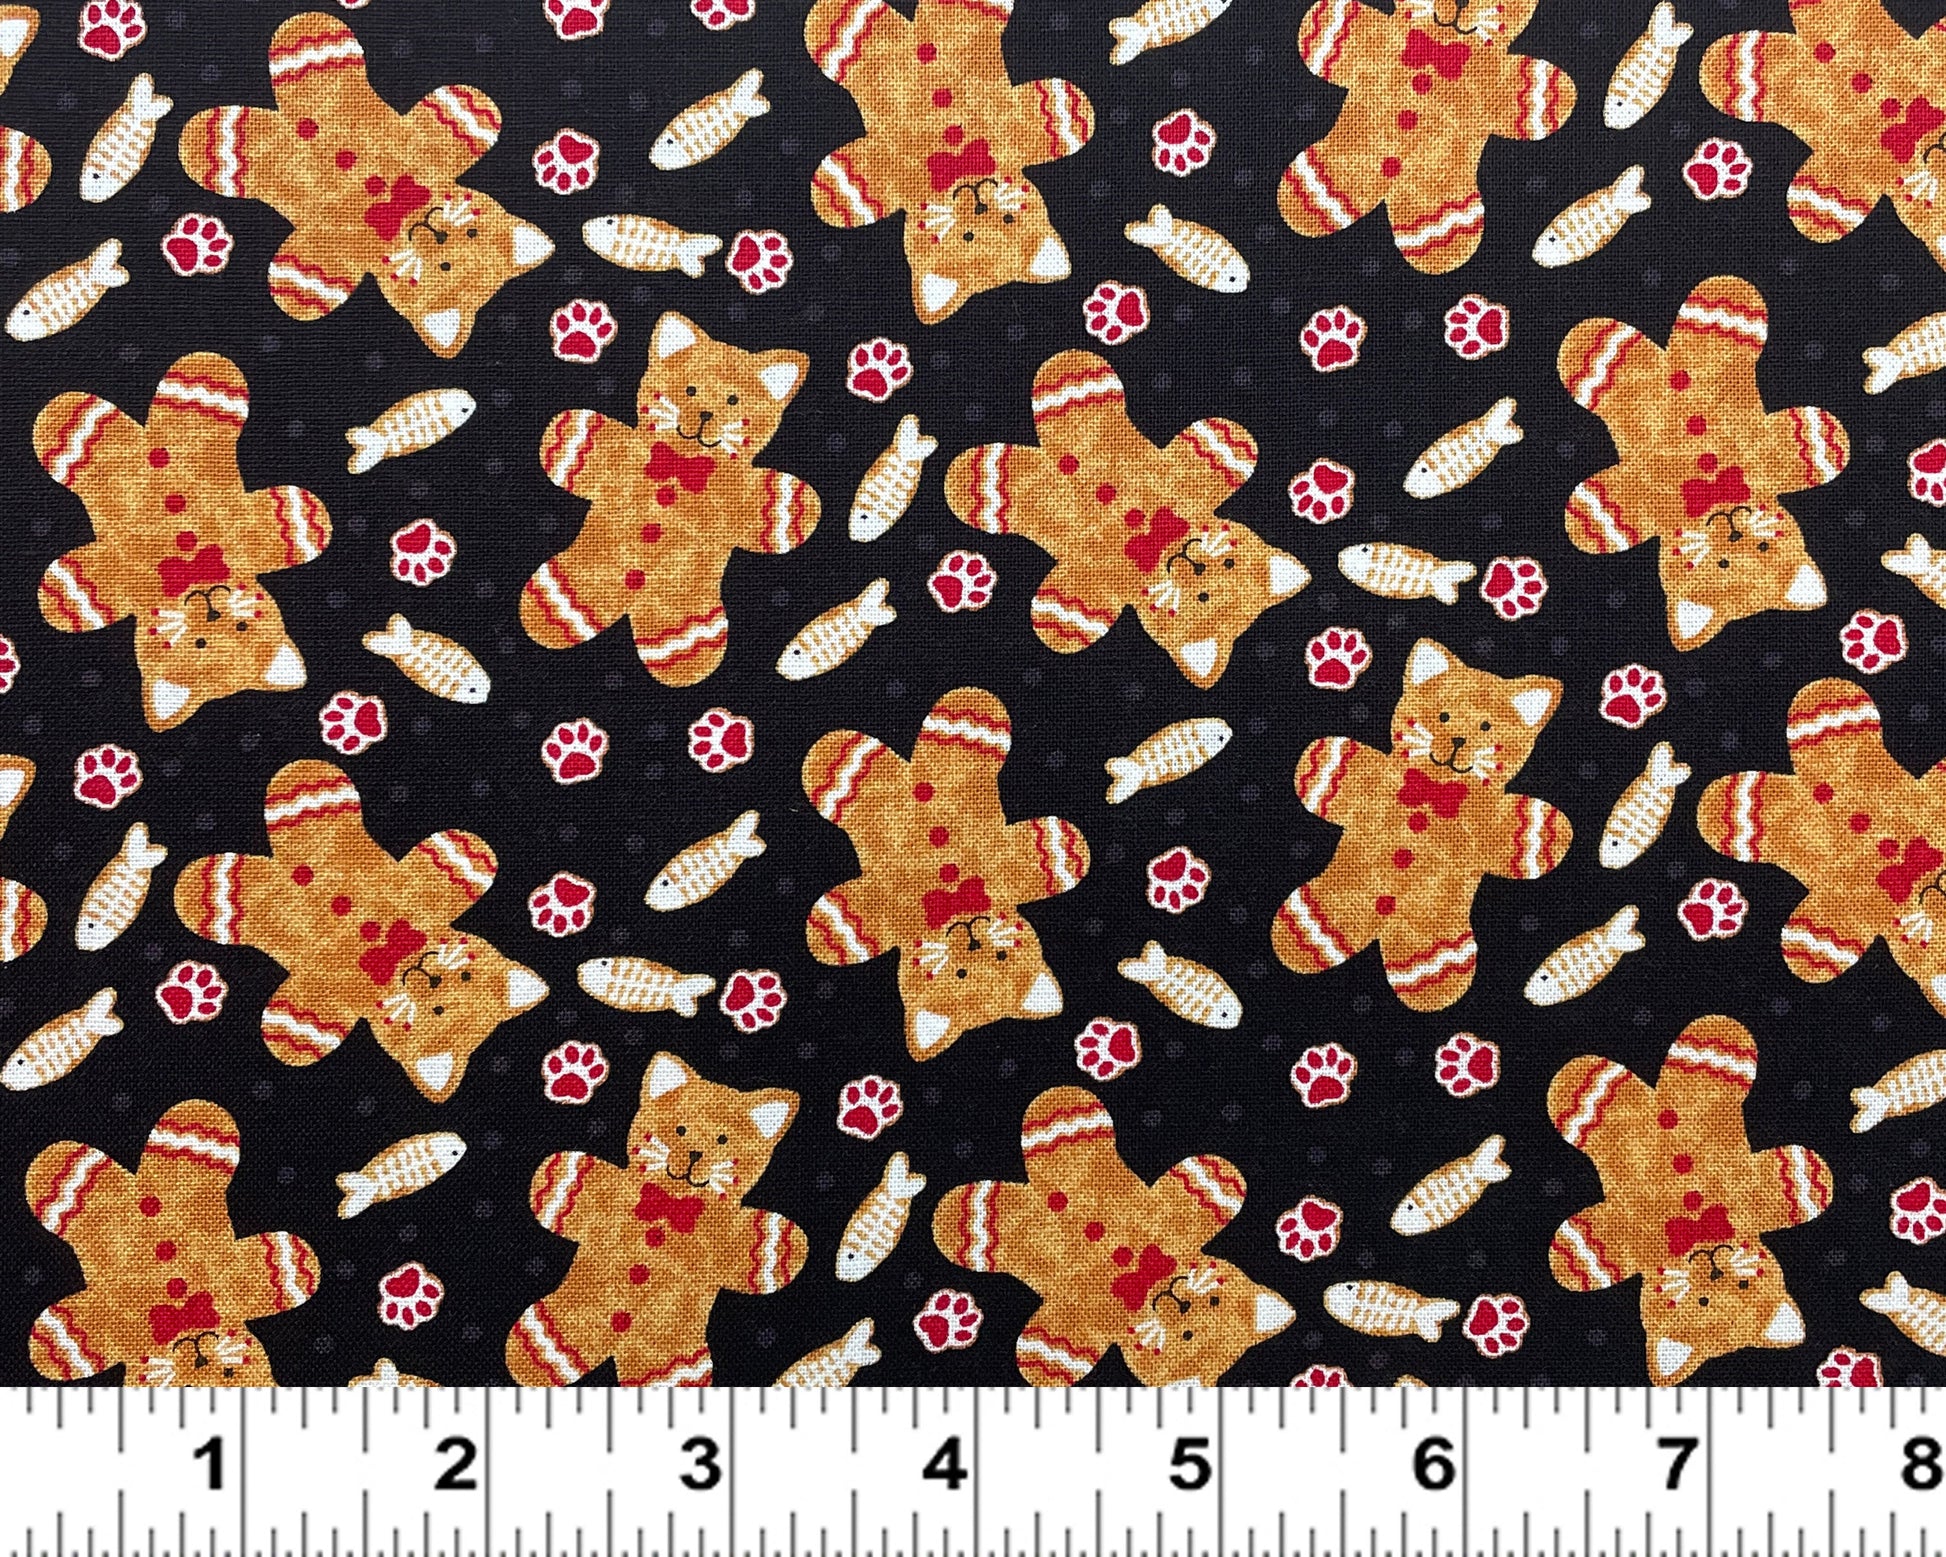 Christmas Cookie Cat Fabric - Ginger Cookie Cat - Furry and Bright Collection - 100% cotton - Kayomi Harai for Studio E - SHIPS NEXT DAY